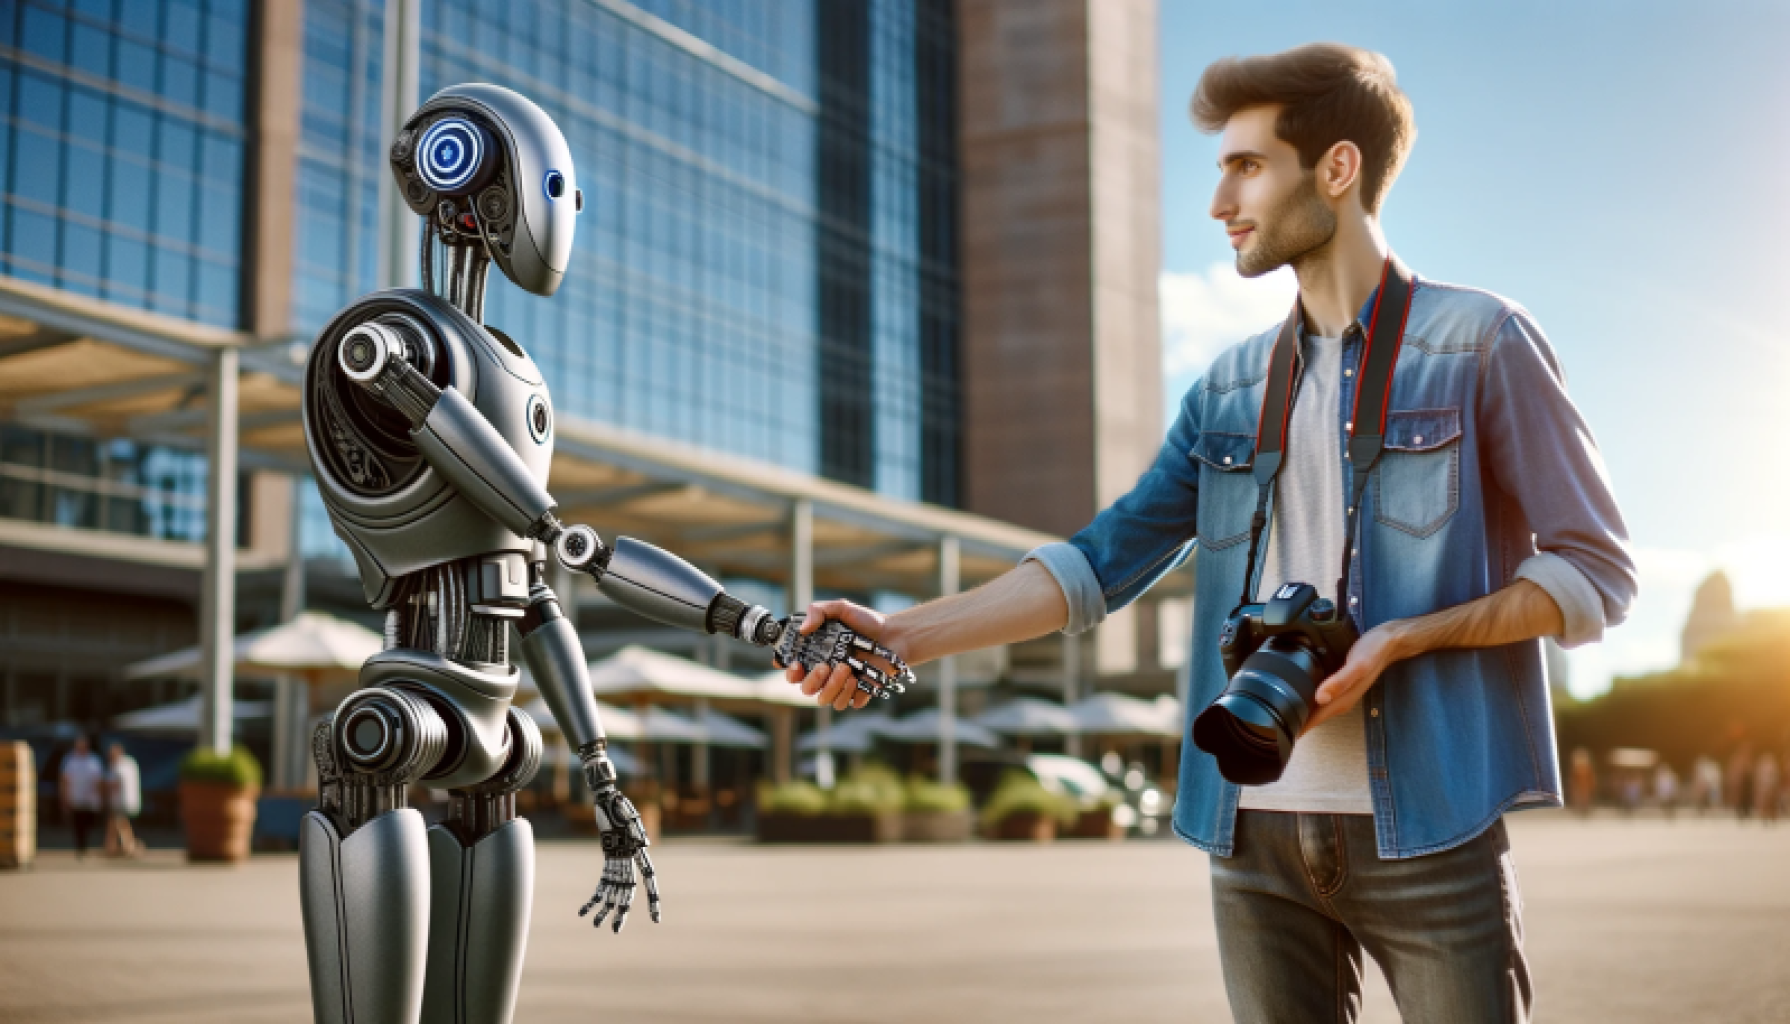 A humanoid robot shakes hands with a masculine presenting photographer with dark hair and stubble outside a building.